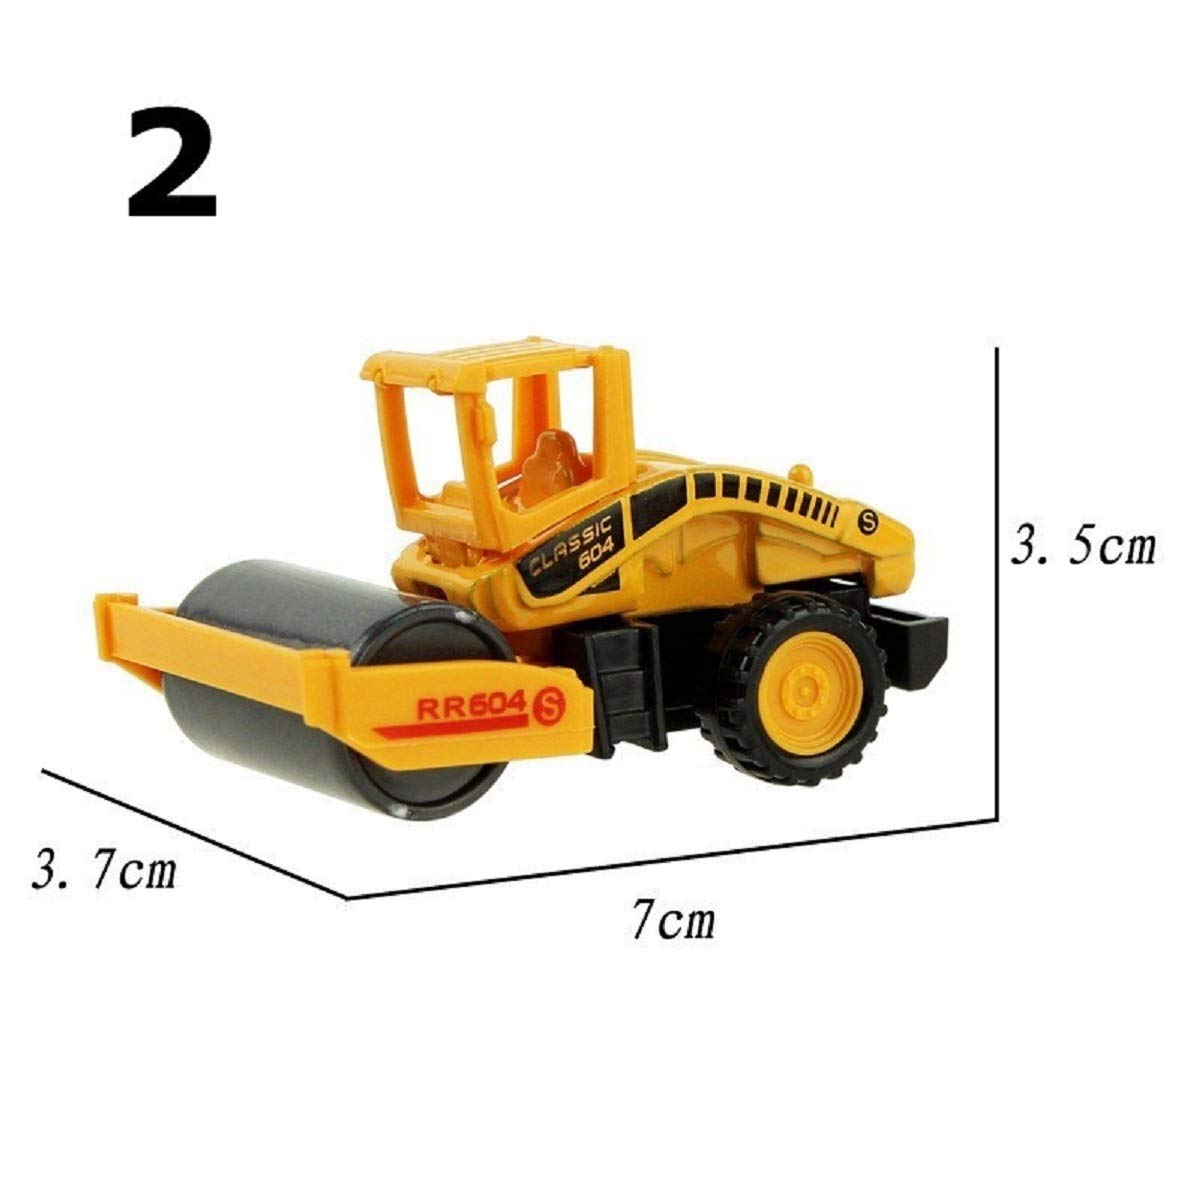 8 Types Diecast Mini Alloy Construction Vehicle Engineering Car Dump-car Dump Truck Model Classic Toy (Pack of 8)